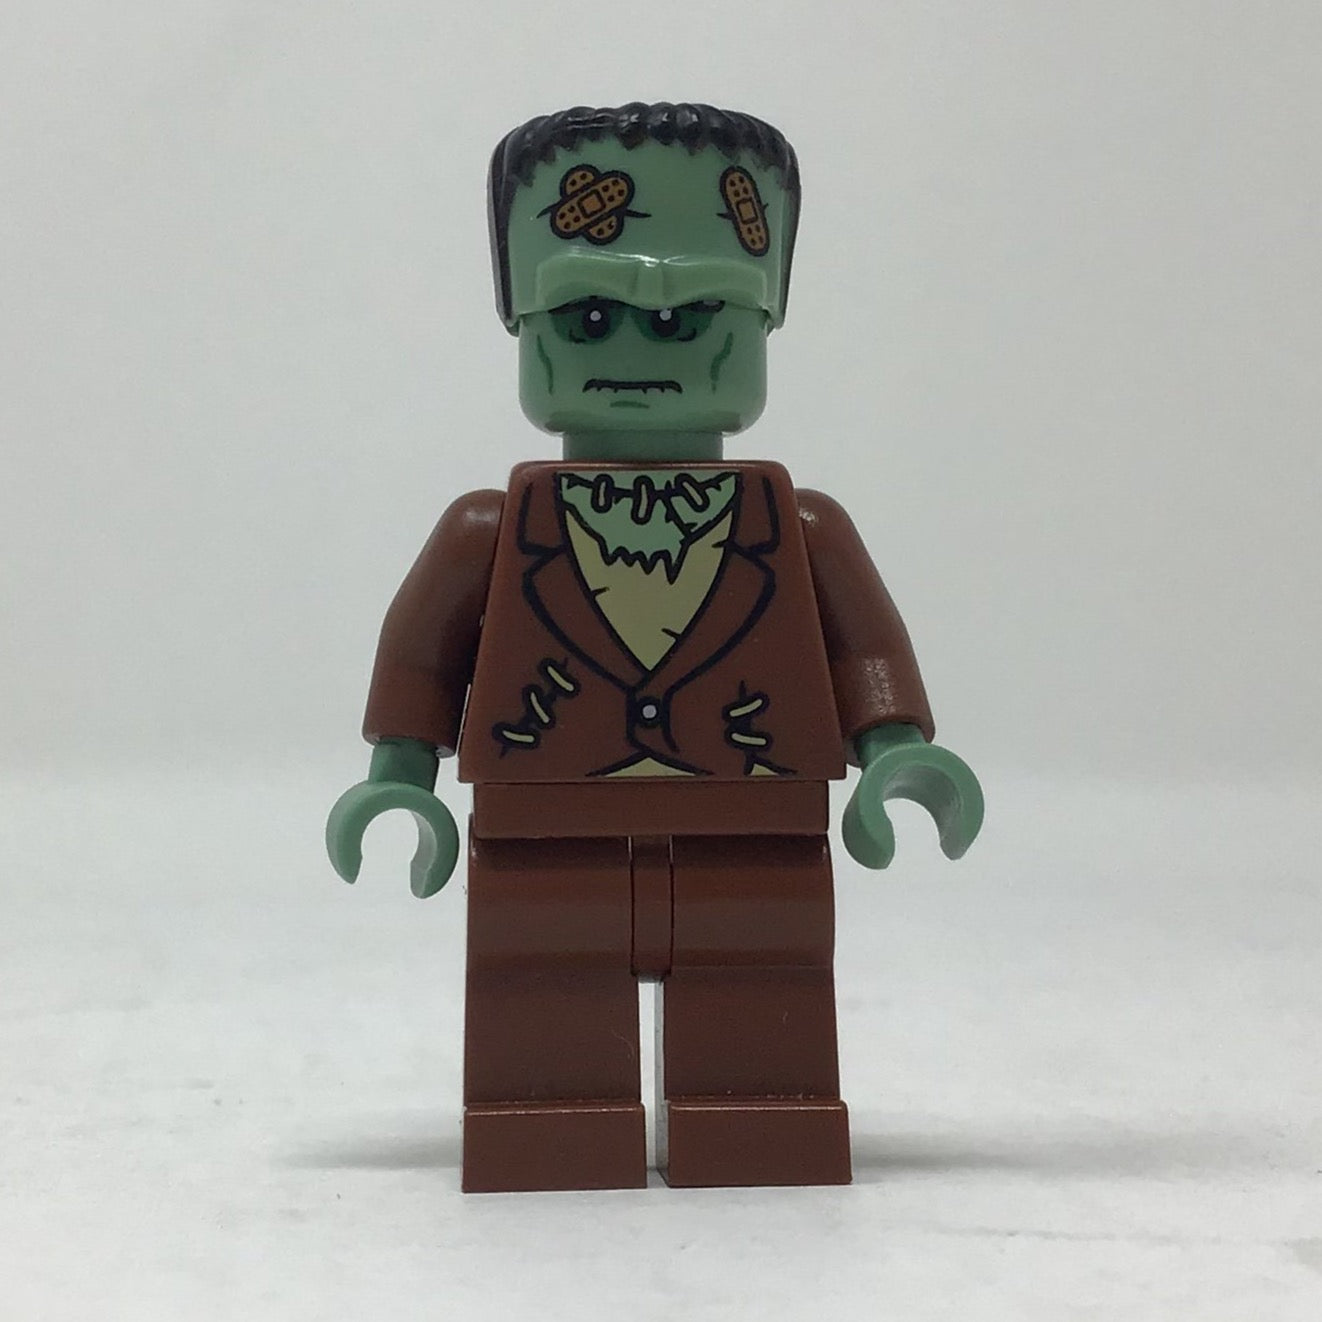 S4 The Monster - Series 4 Minifigure (col055)